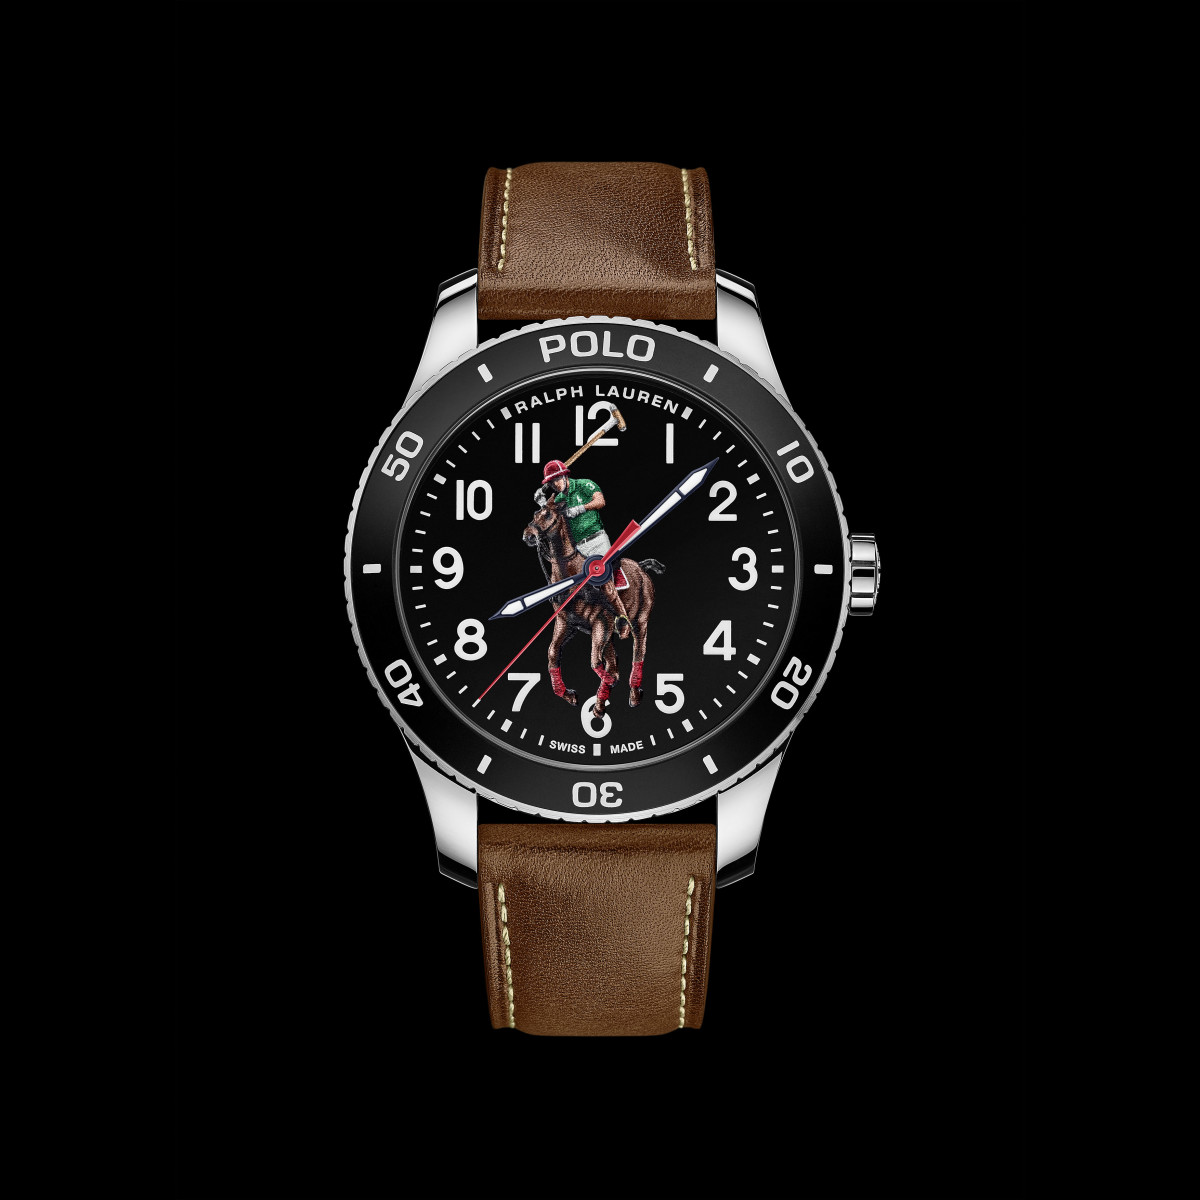 Watch of the Week: Ralph Lauren’s New Polo Watches Bring Bold, Preppy ...